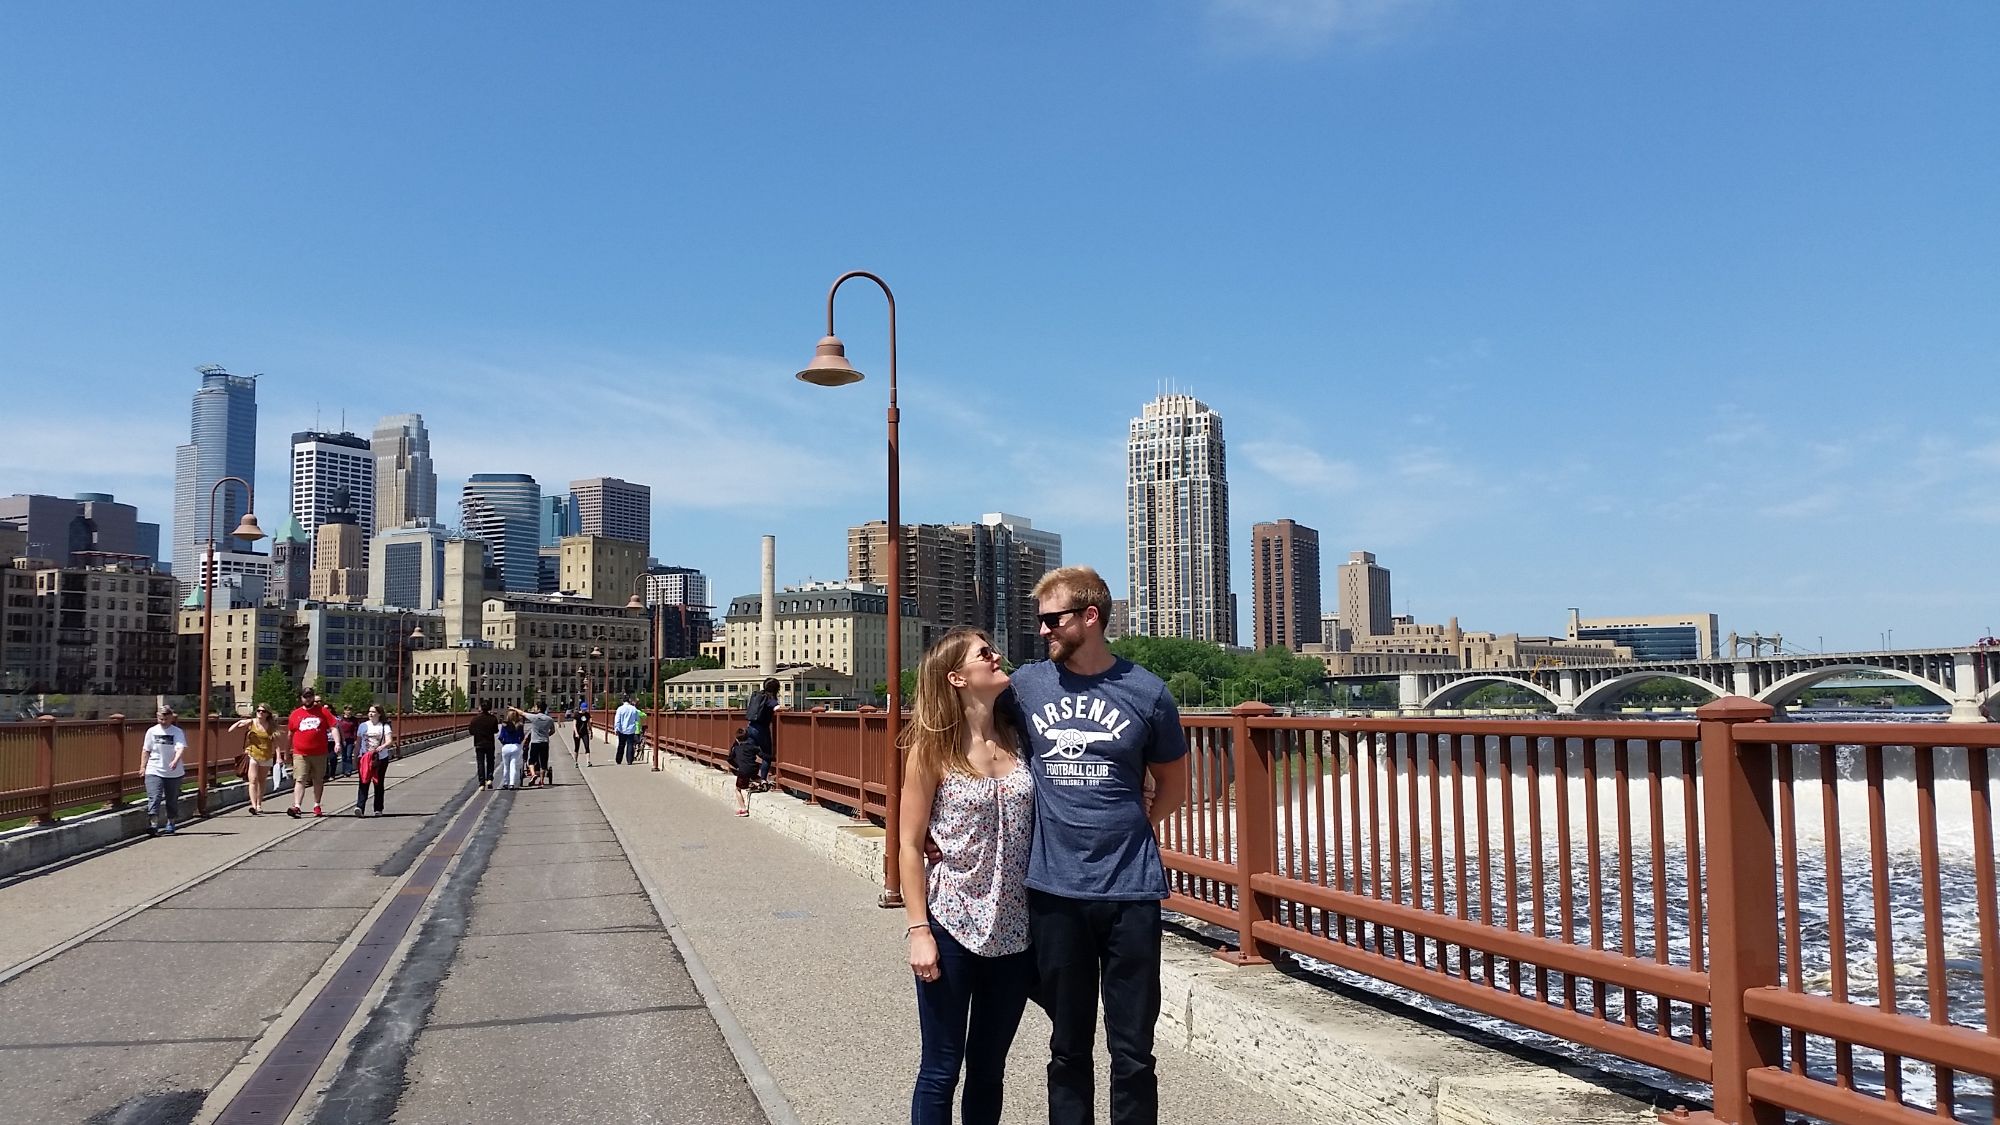 Couple smiling at each other on bridge in city.